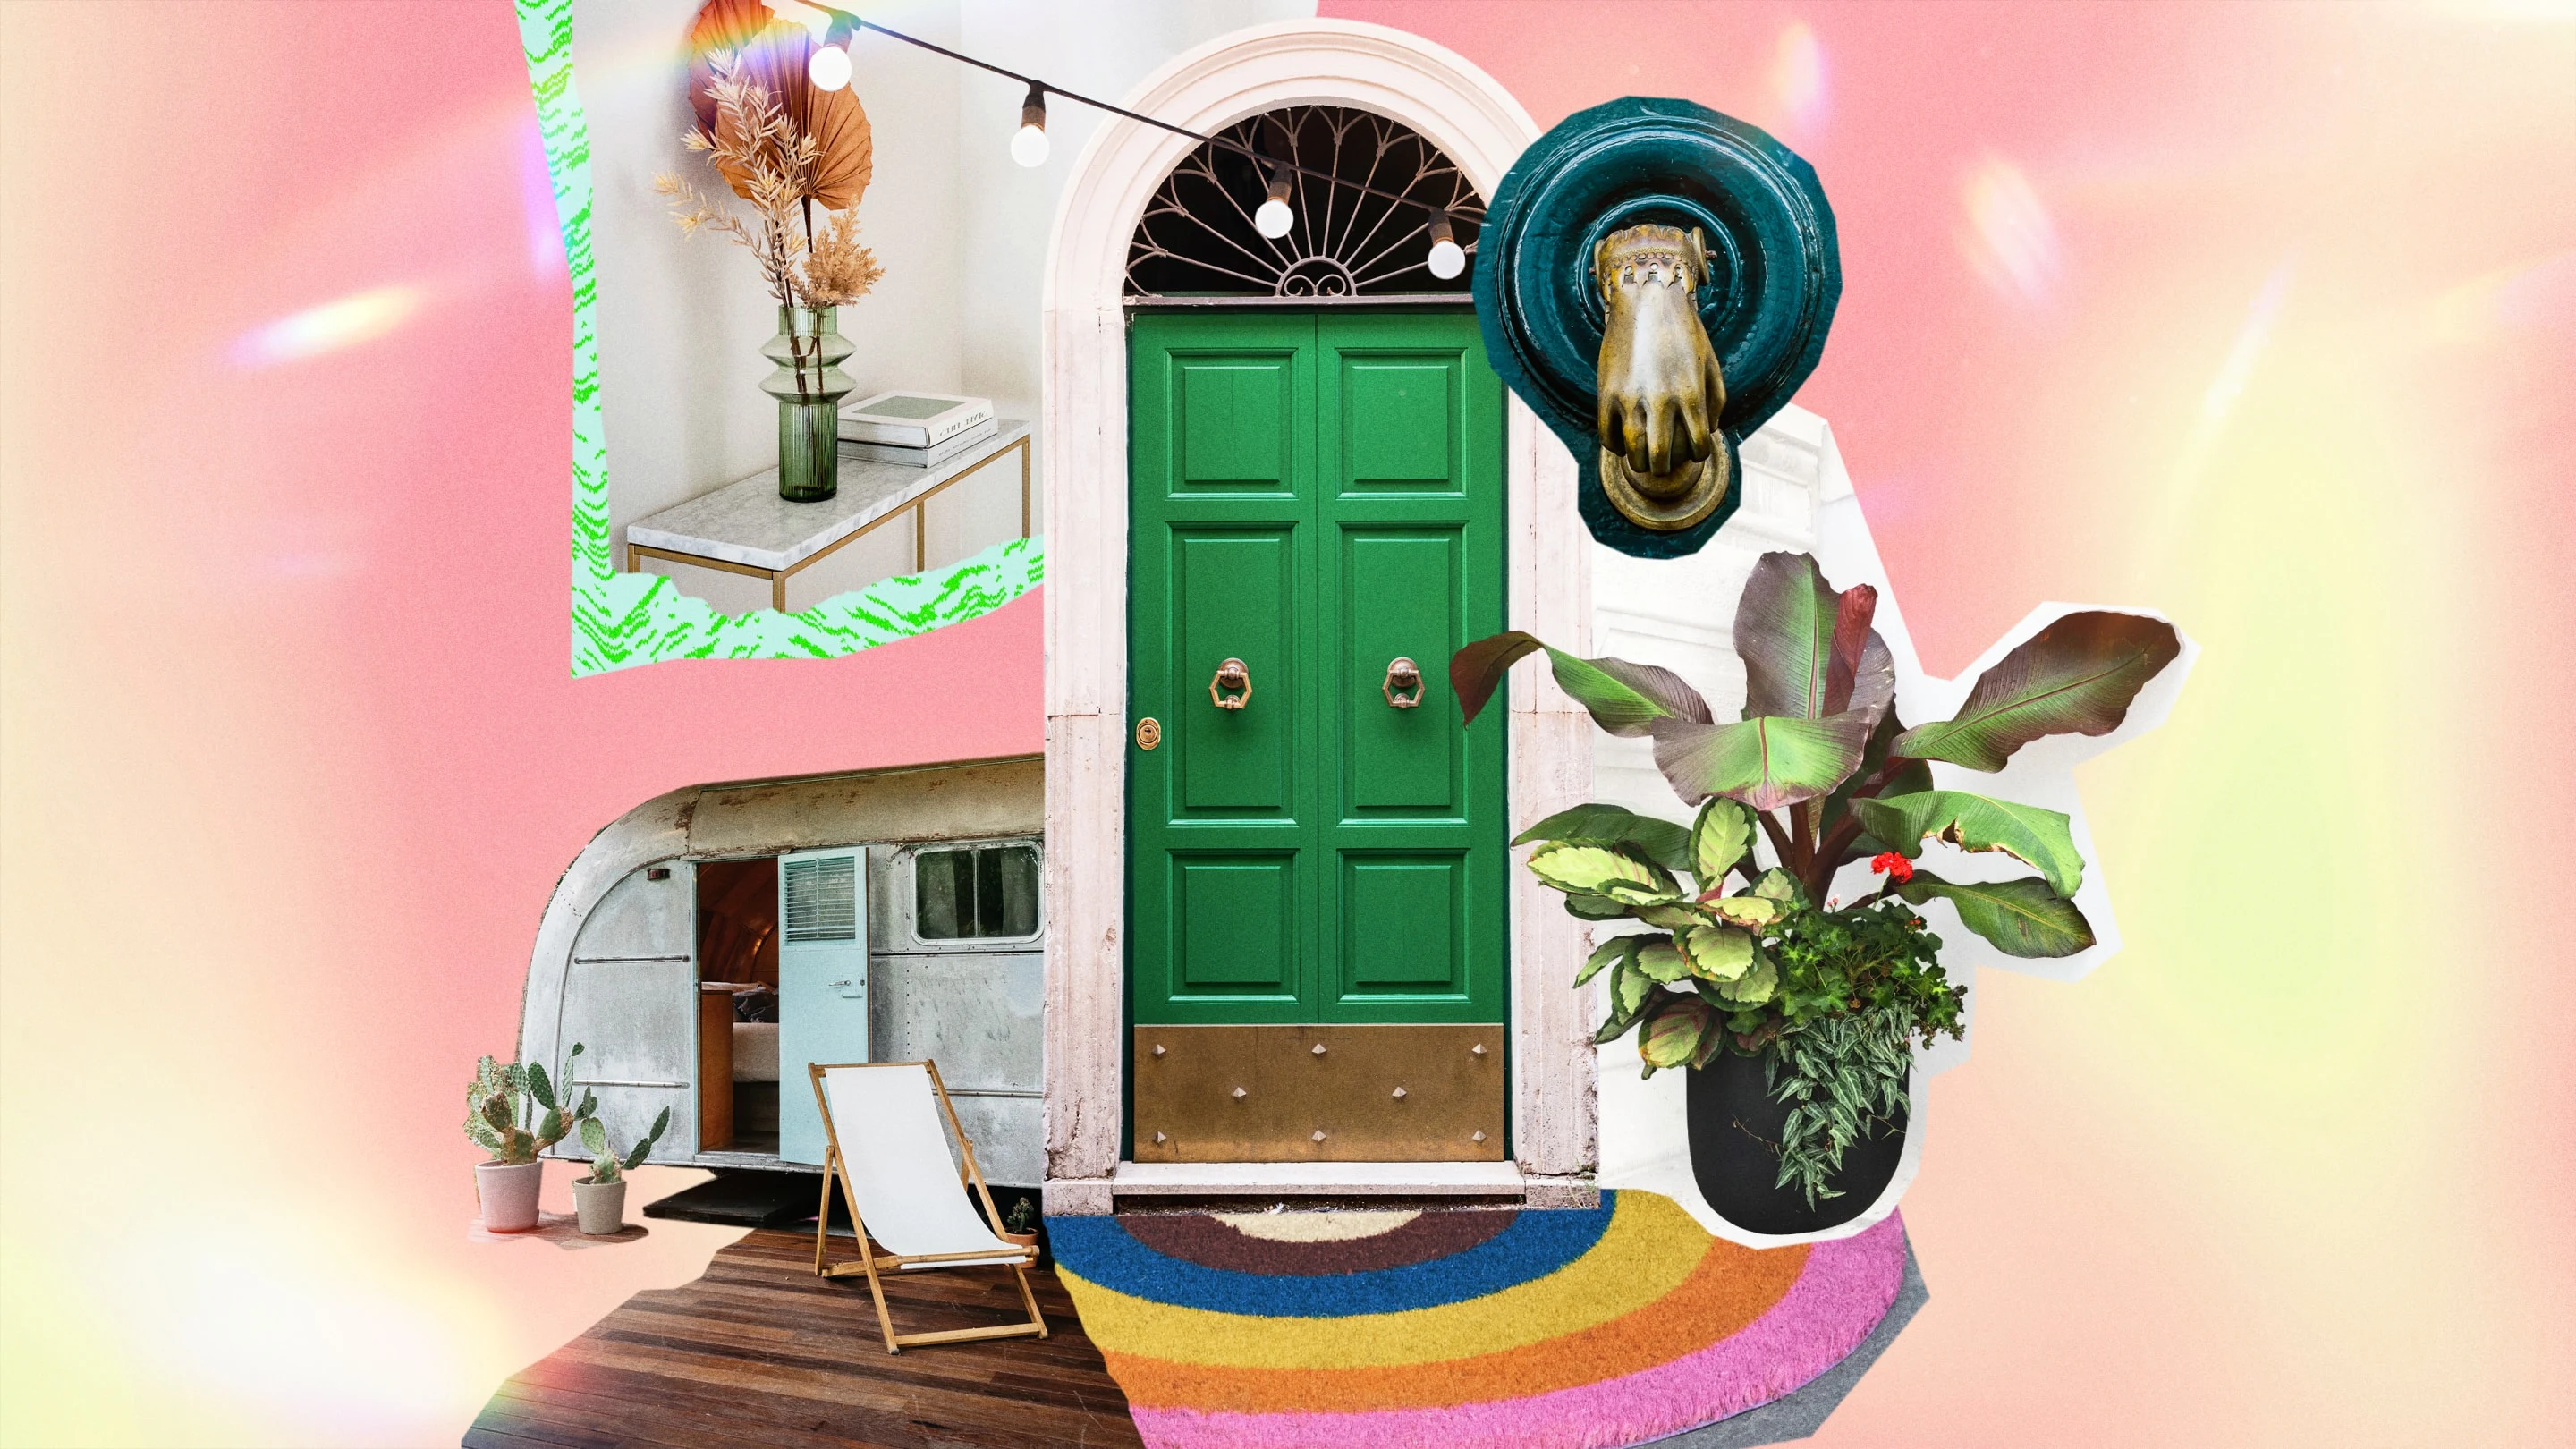 An eclectic collage featuring a bright green door surrounded by deconstructed images of a big plant, a bright rug, a hallway table and a camper van.